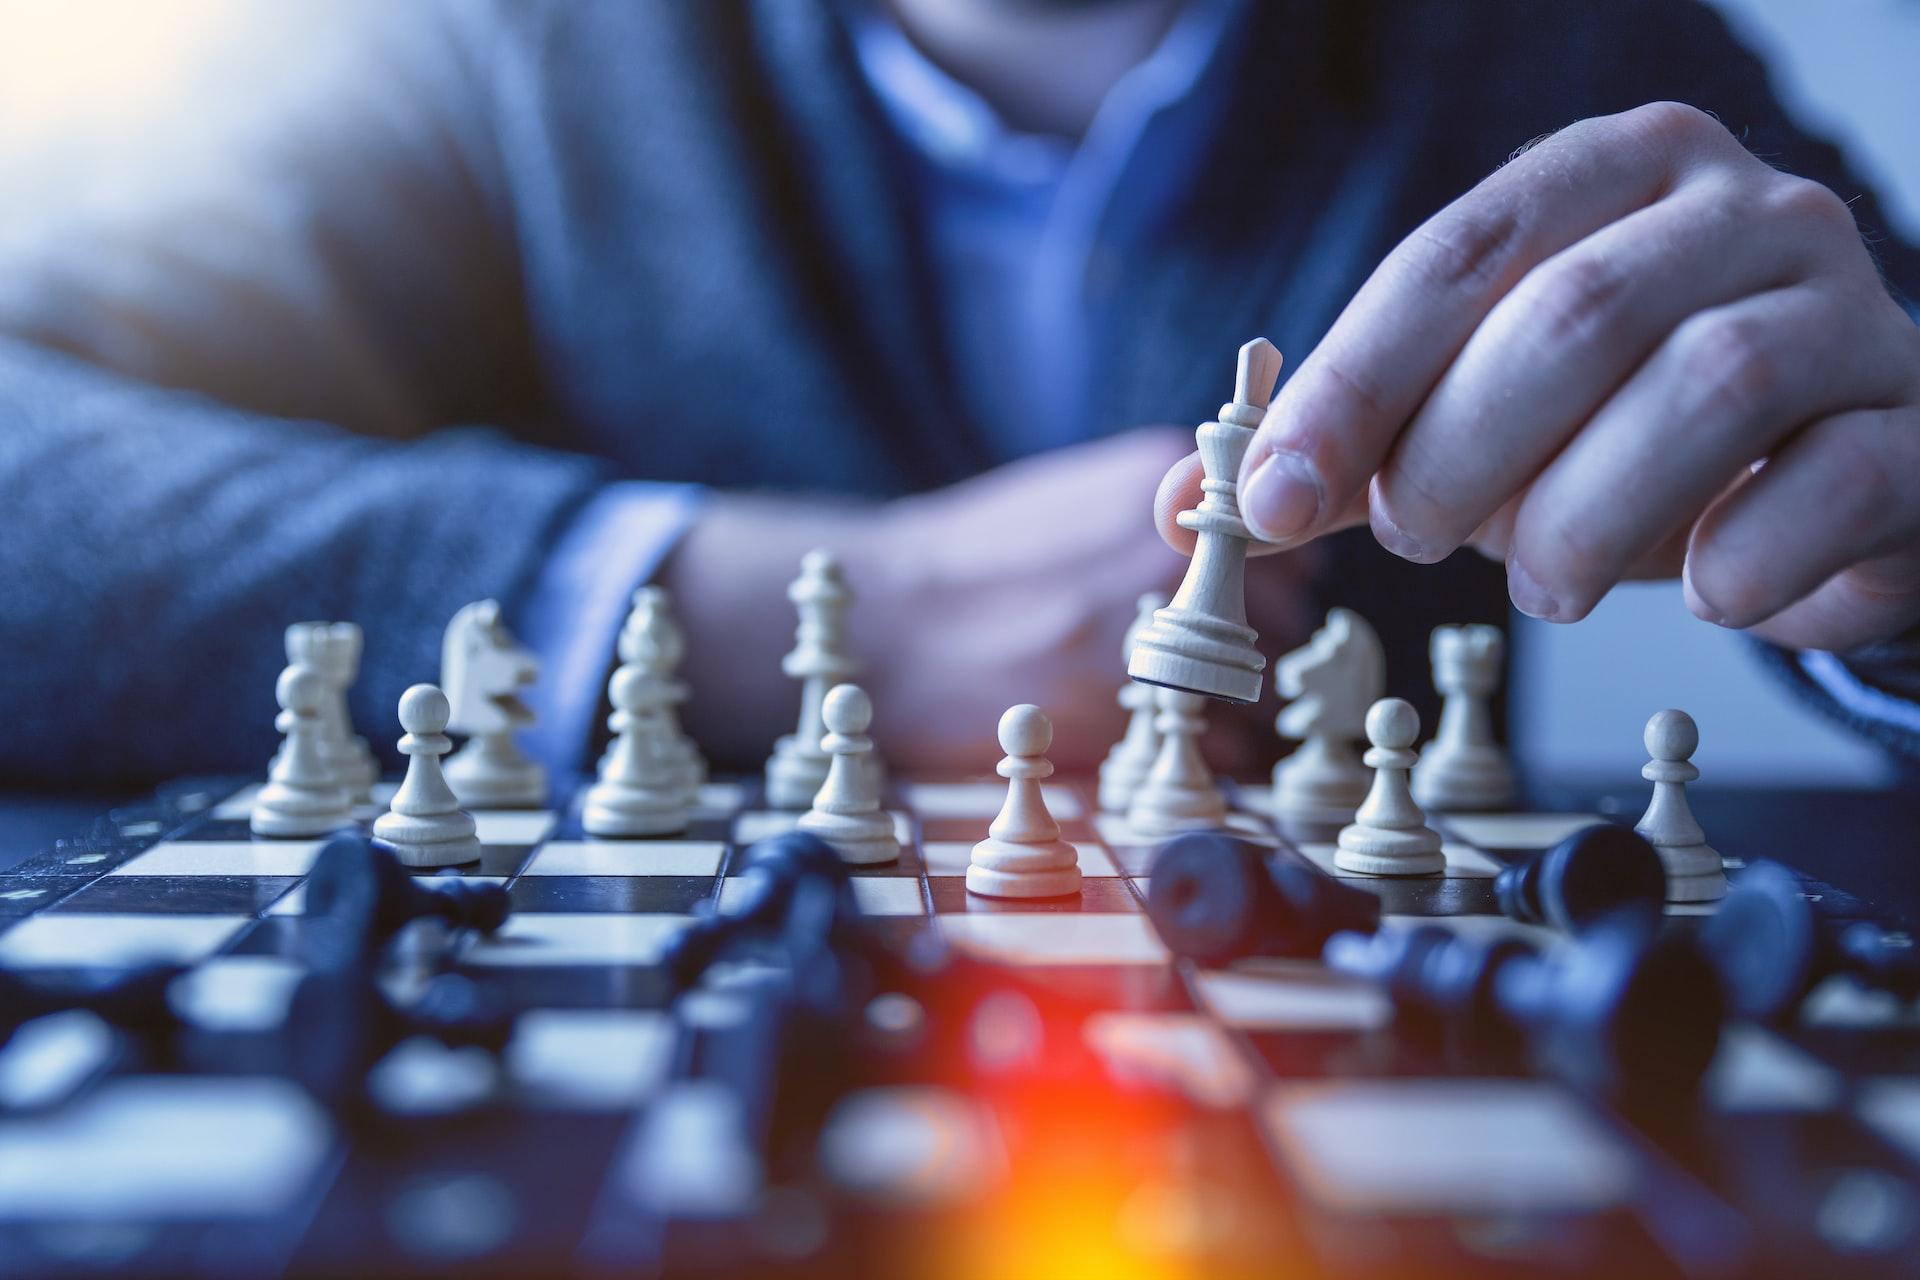 For the study, researchers followed 121 players through three eight-week chess tournaments, recording more than 30,000 moves under varying air quality conditions.